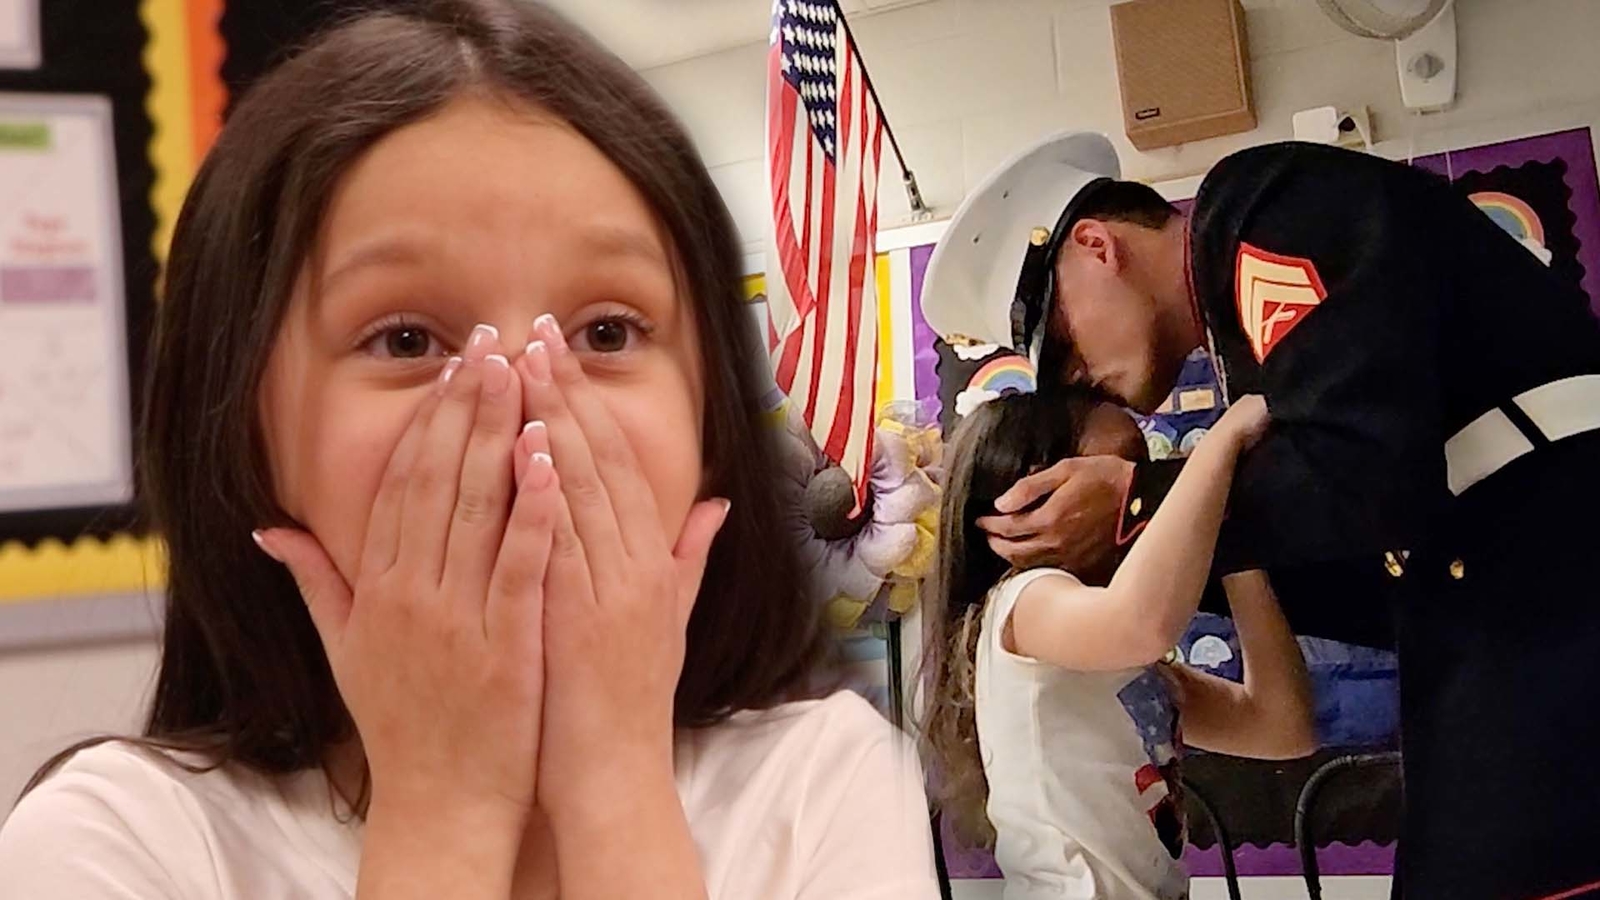 U.S. Marine Hector Aviles gave his little sister a surprise to remember during his break from deployment. [Video]